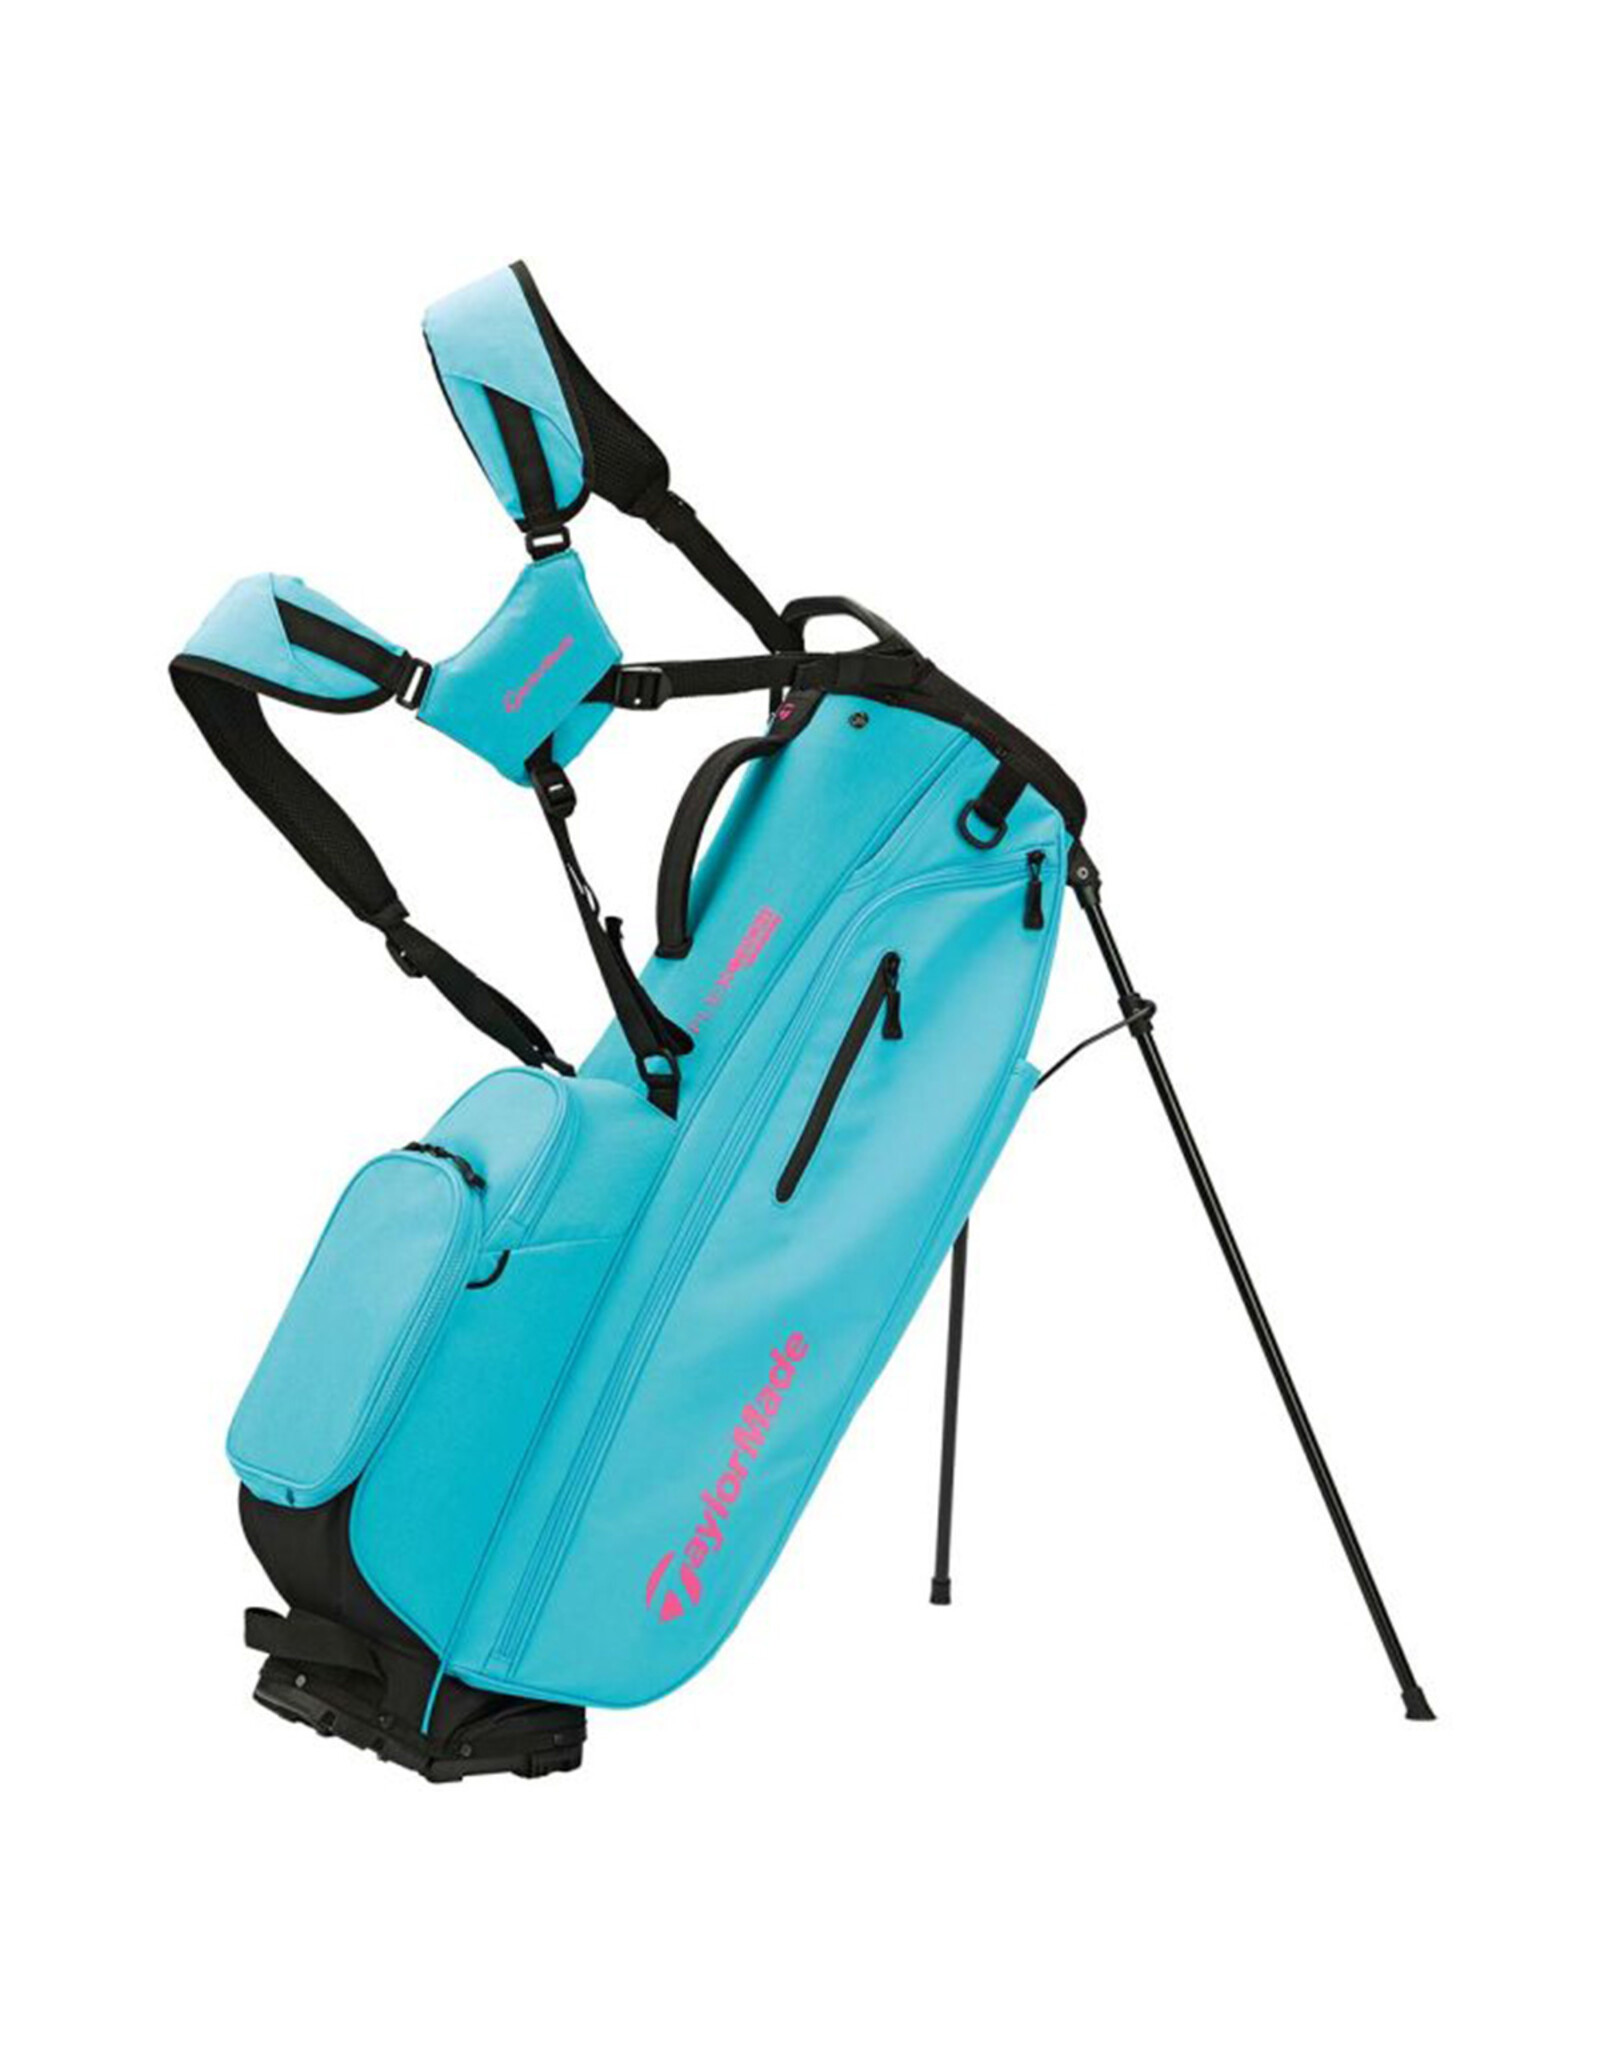 TaylorMade TaylorMade FlexTech Stand Bag Miami Blue